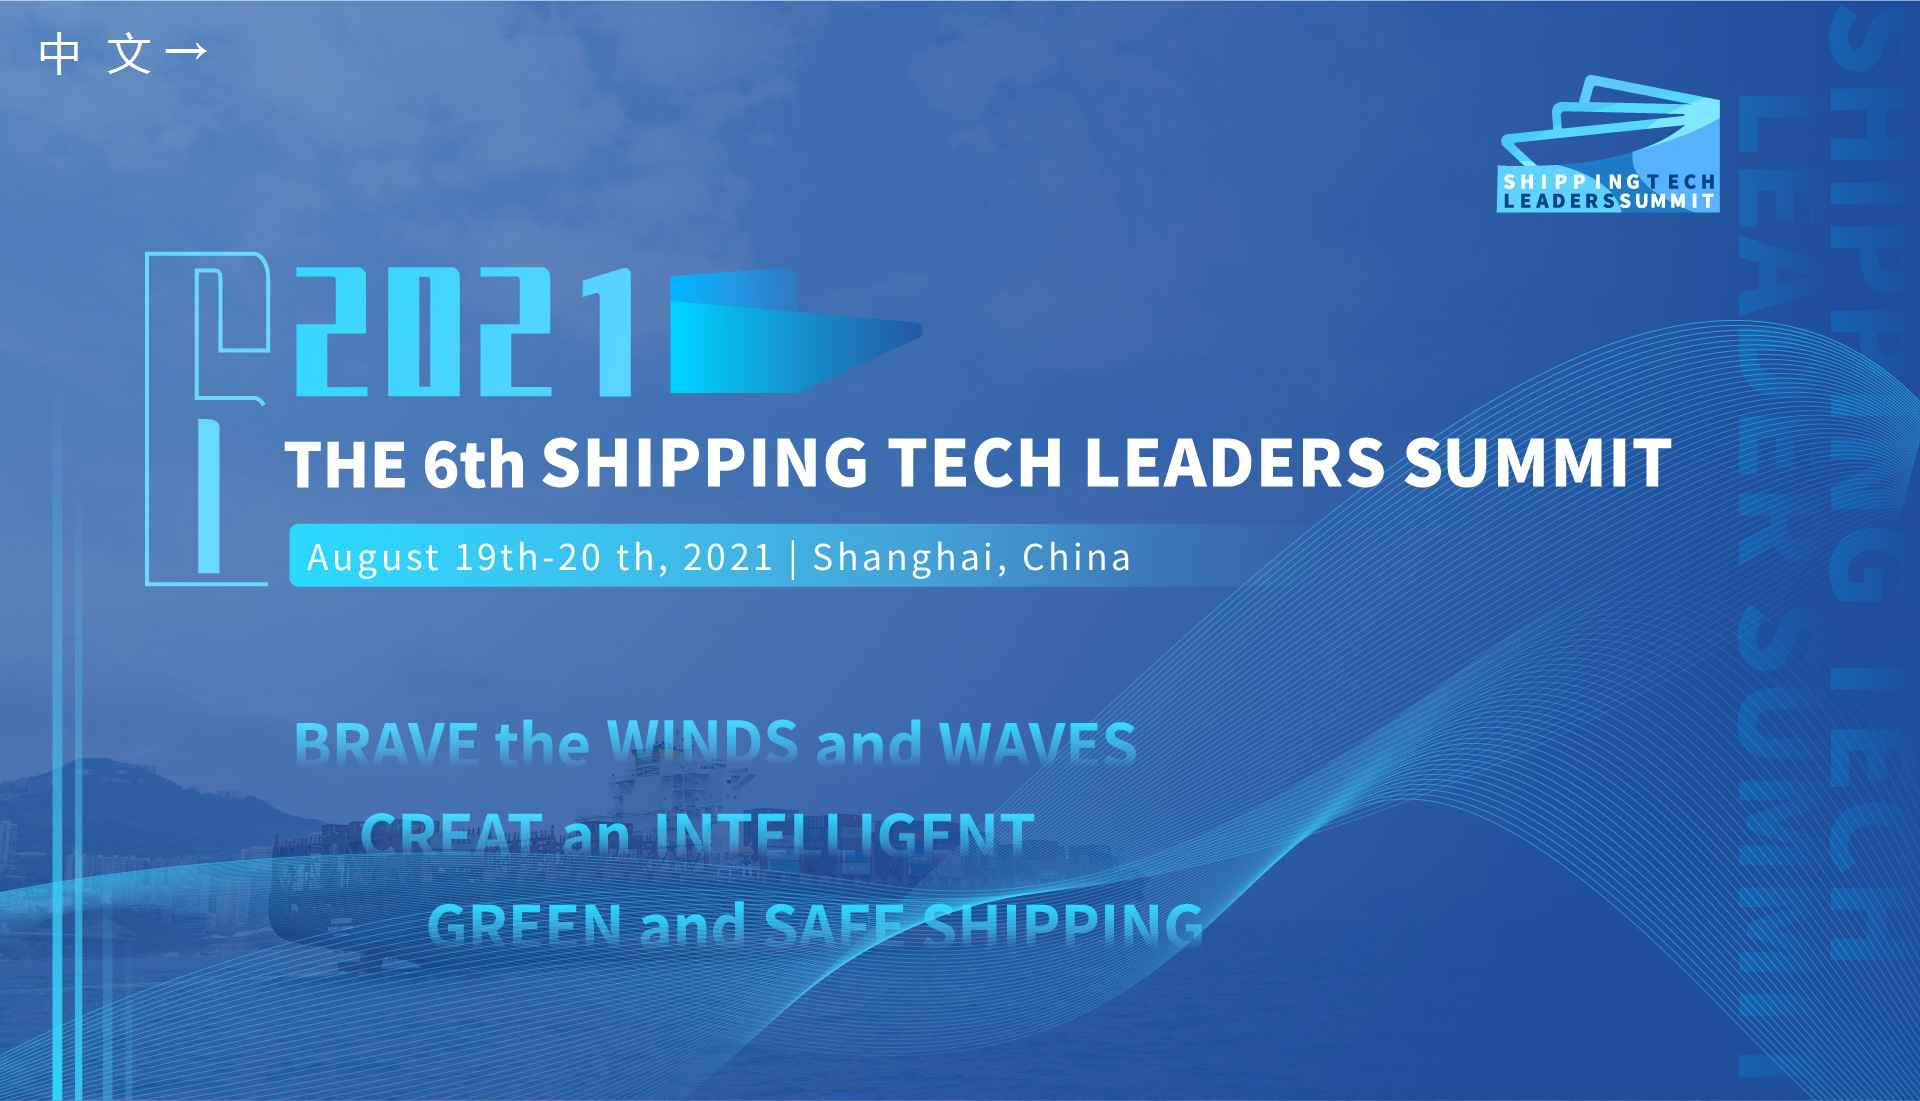 2021 The 6th SHIPPING TECH LEADERS SUMMIT